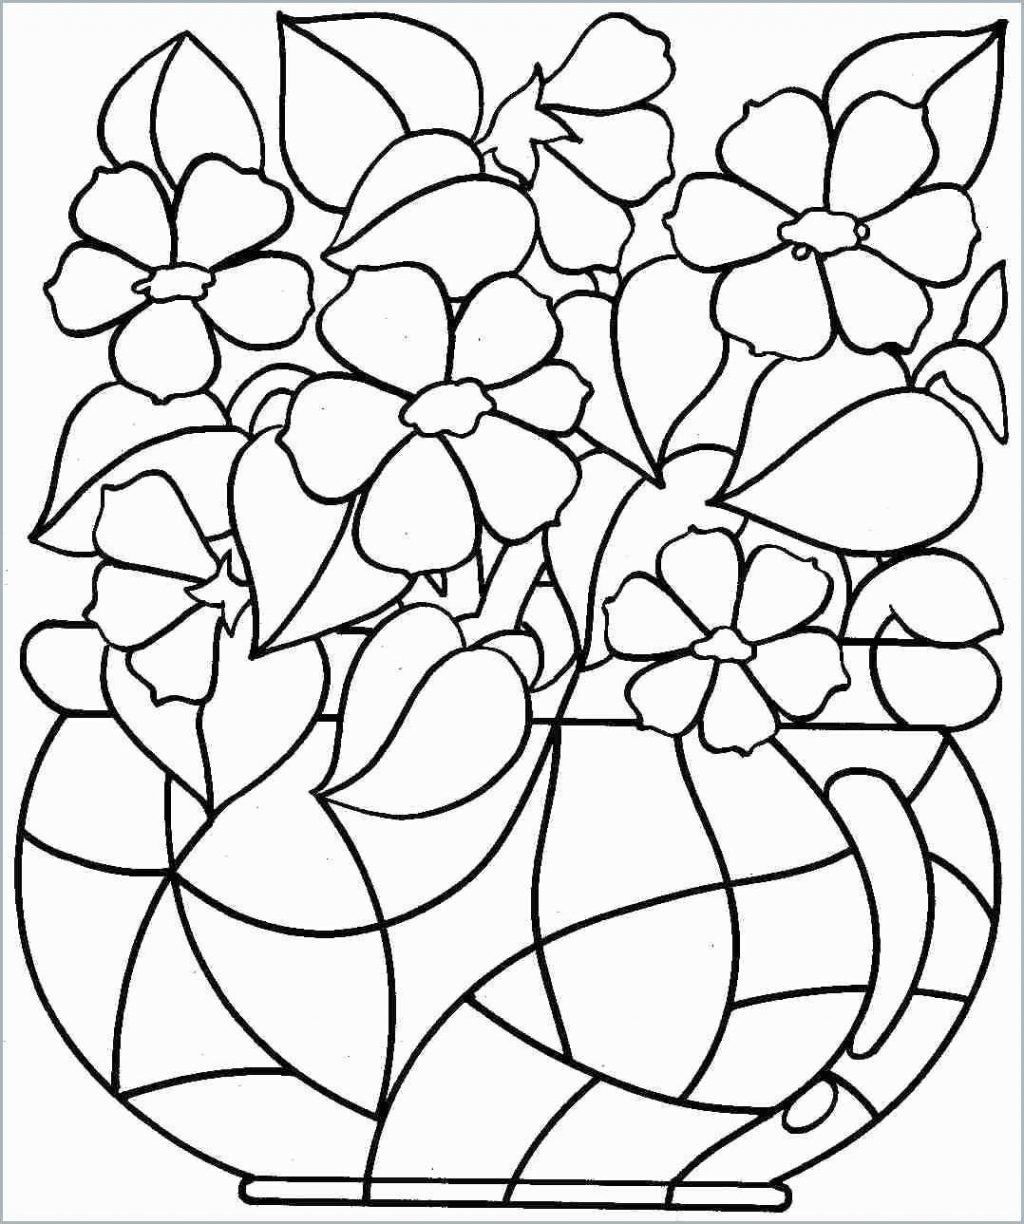 Coloring Pages ~ Free Printable Springing Pages Of Ships For Men - Free Printable Spring Coloring Pages For Adults